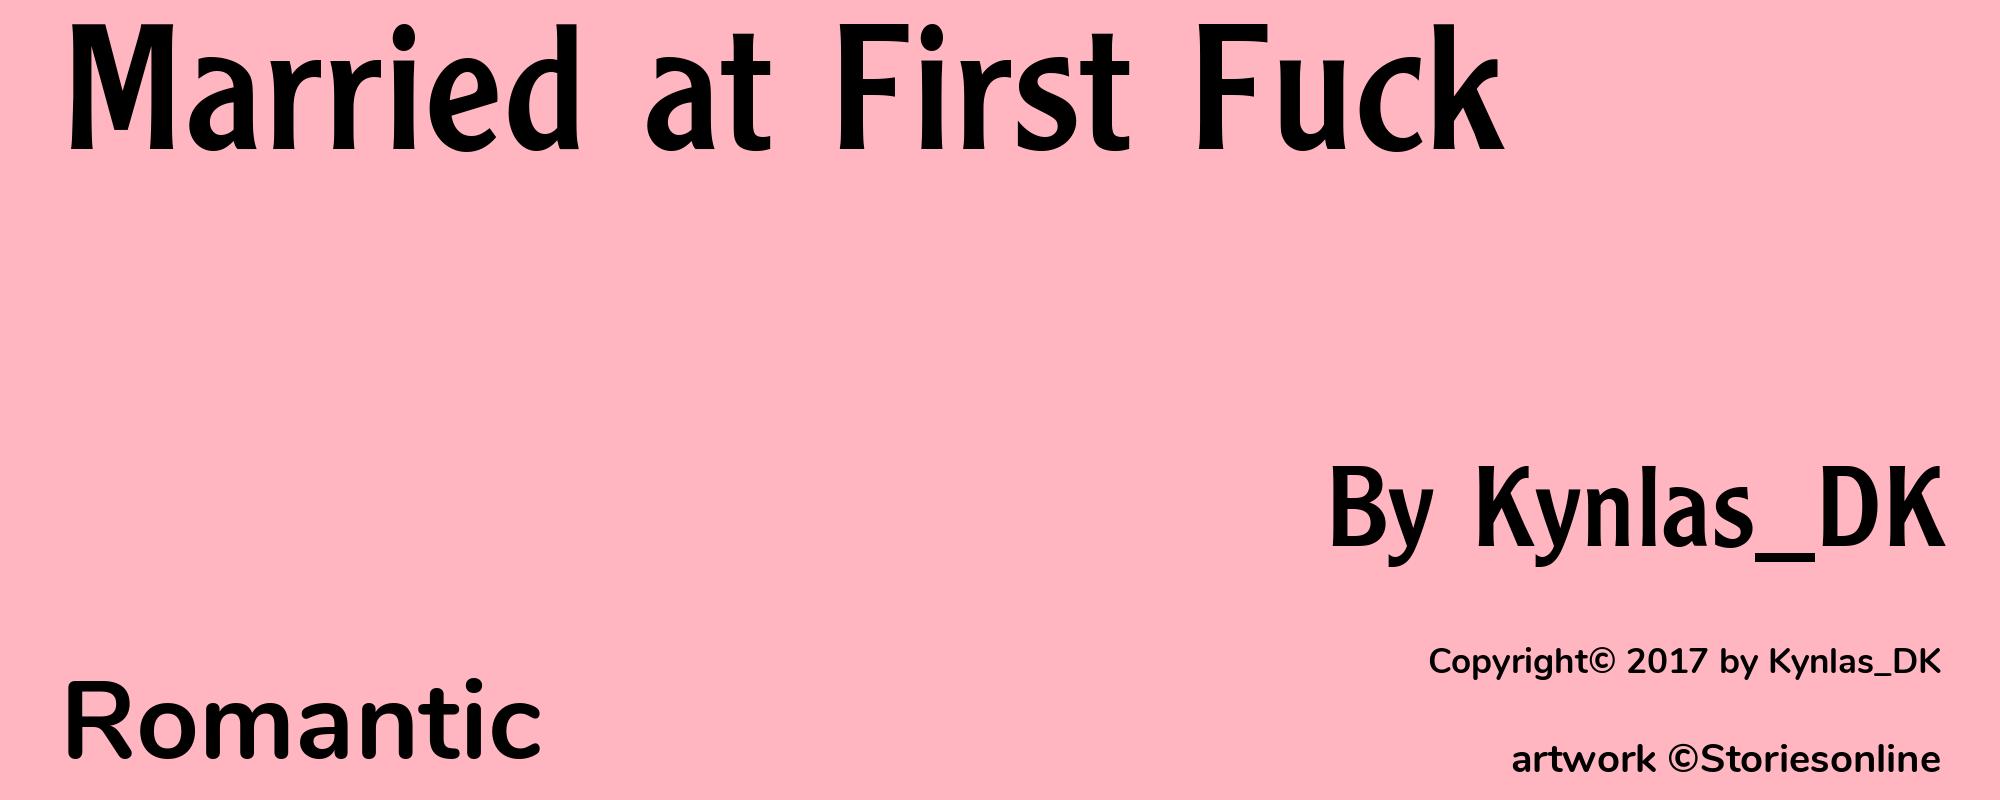 Married at First Fuck - Cover